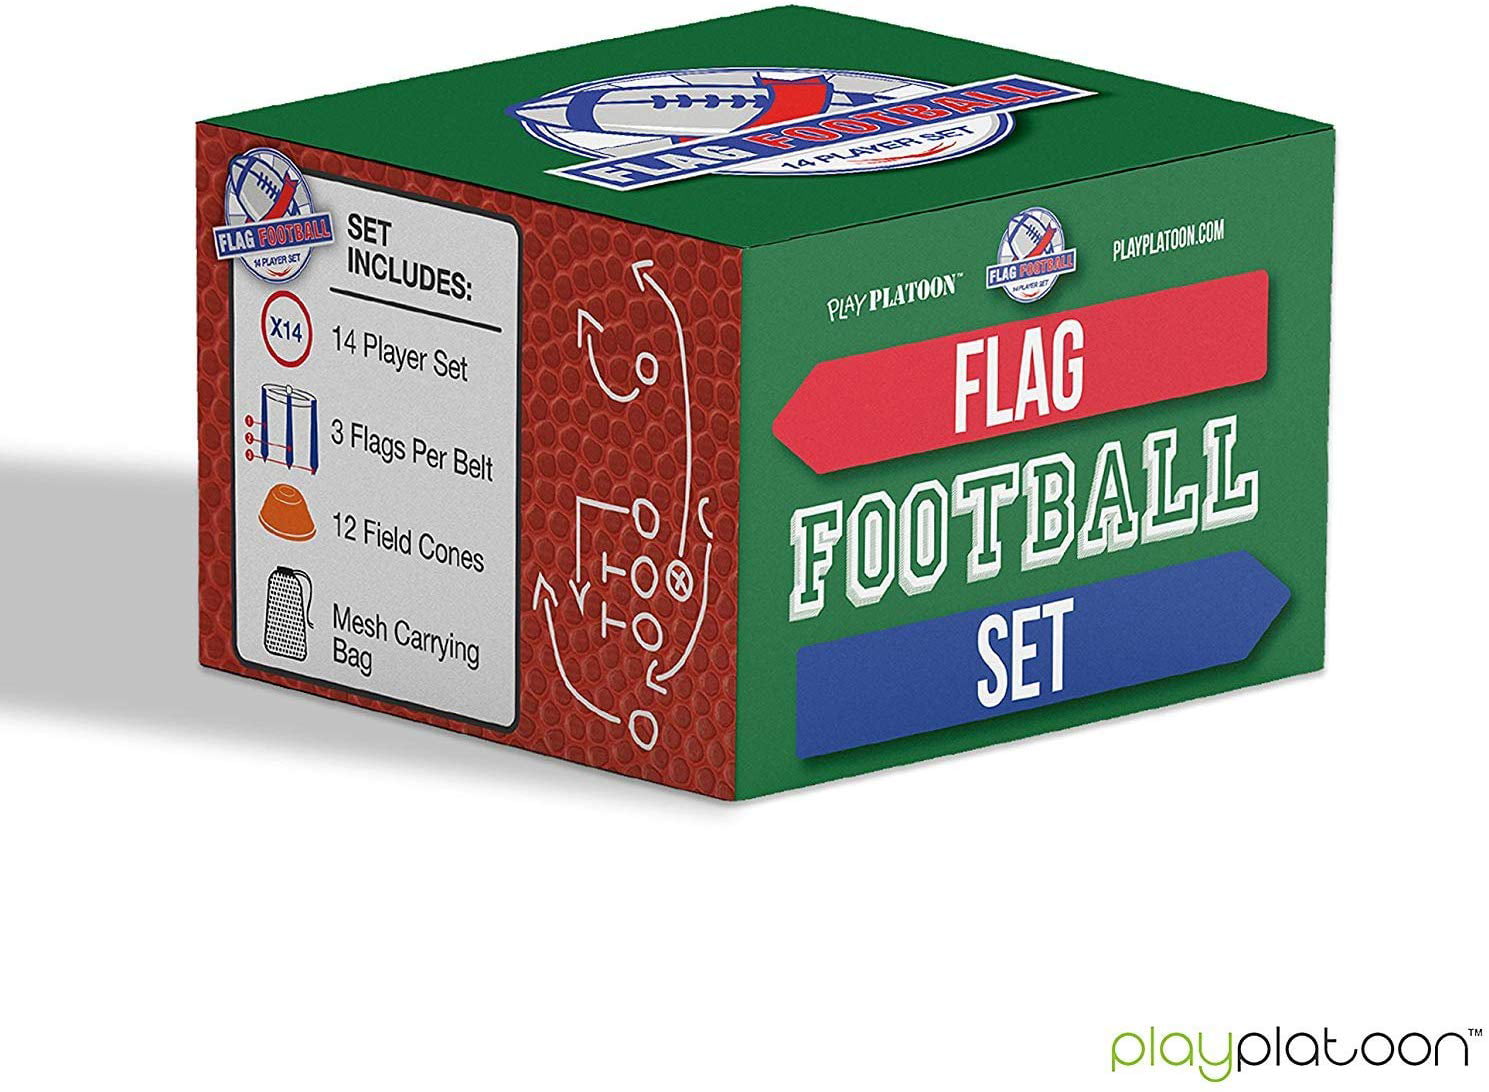 6 X 6 Players 2 Wicked Big Flag Football Sets for sale online 12 Flags and 12 Belt Clips 